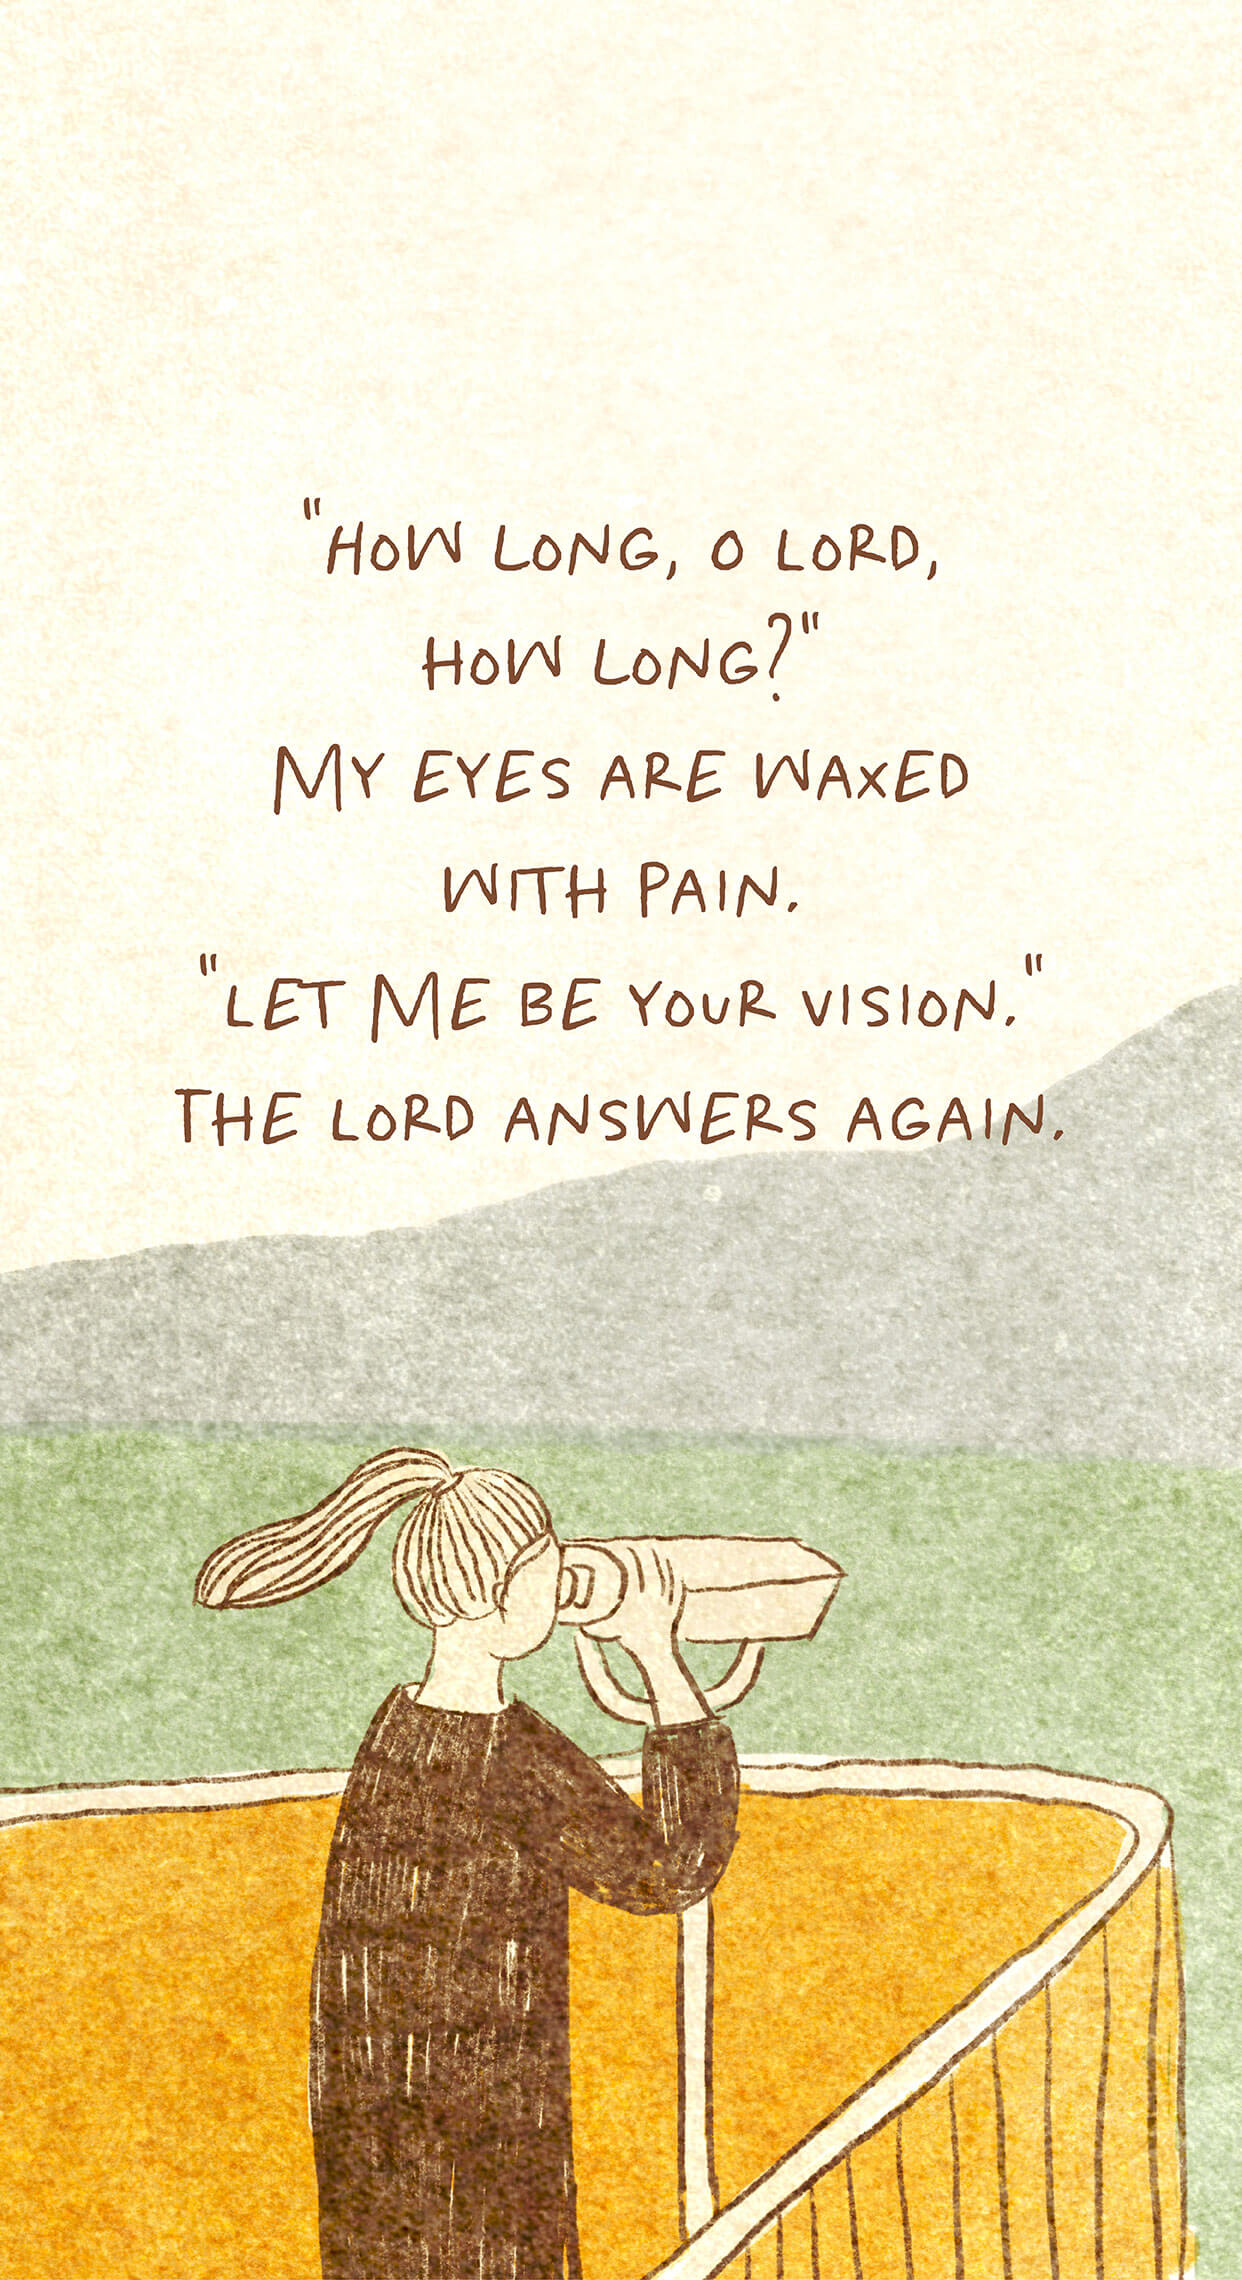 "How long, O Lord, how long?" My eyes are waxed with pain. "Let me be your vision." The Lord answers again.